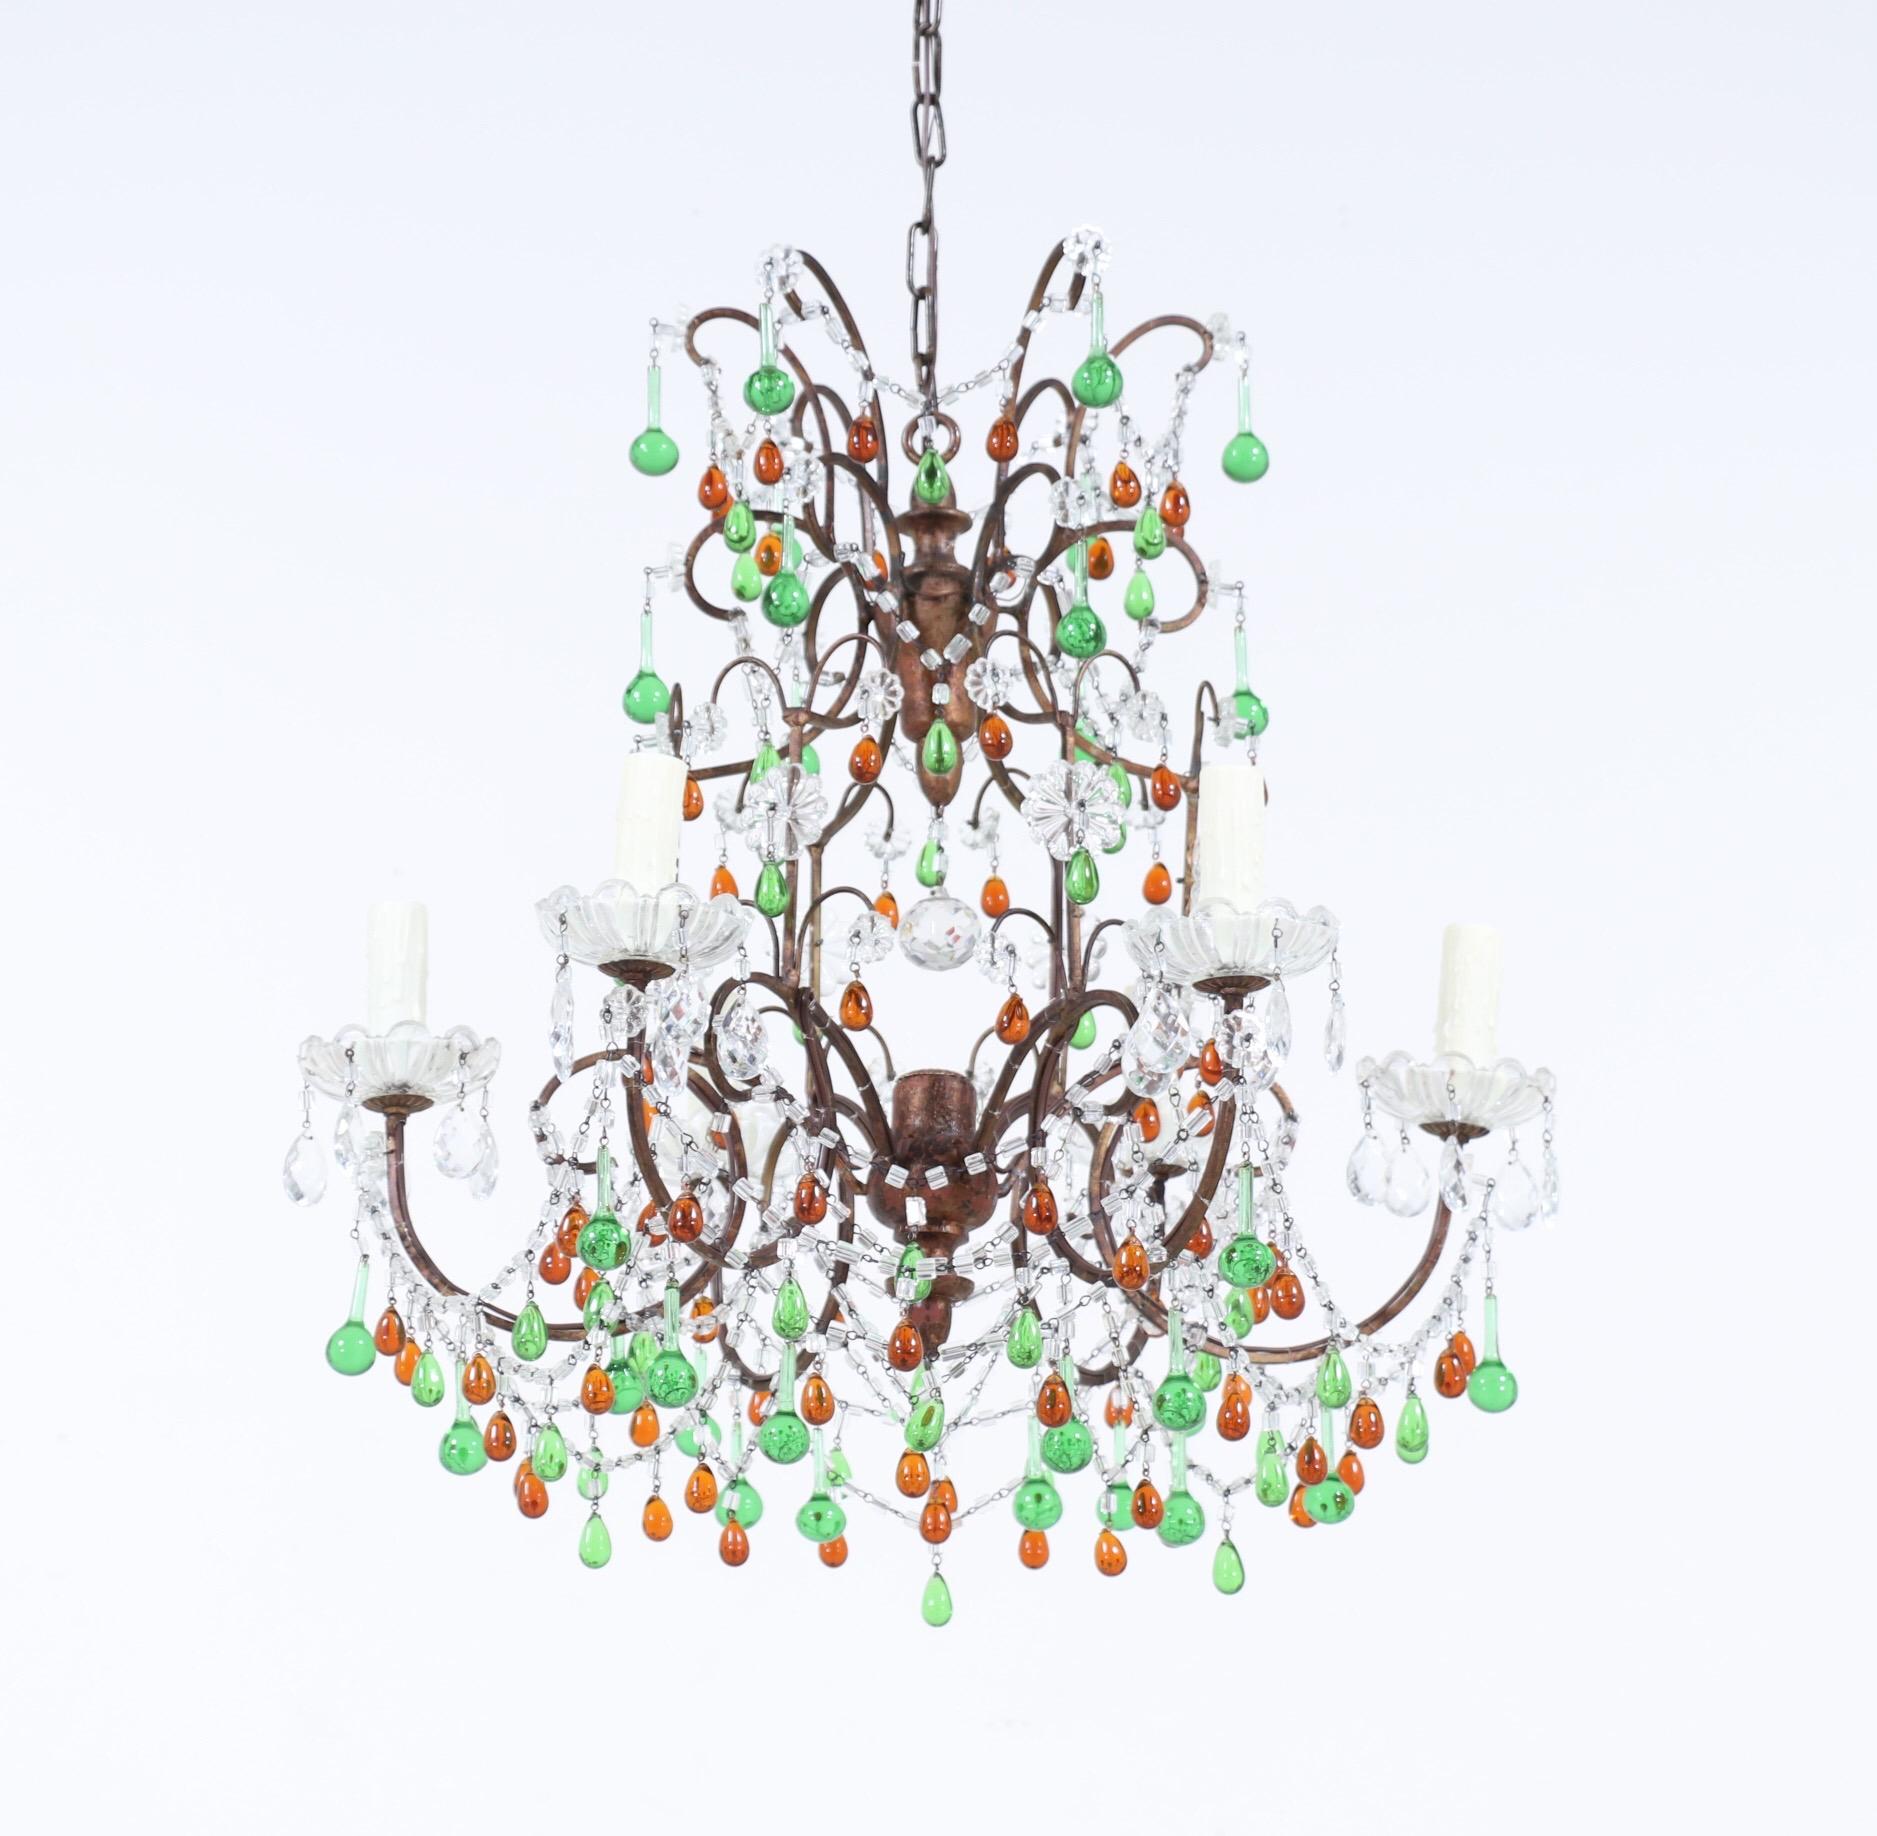 French Provincial Italian Amber And Green Crystal Beaded Chandelier